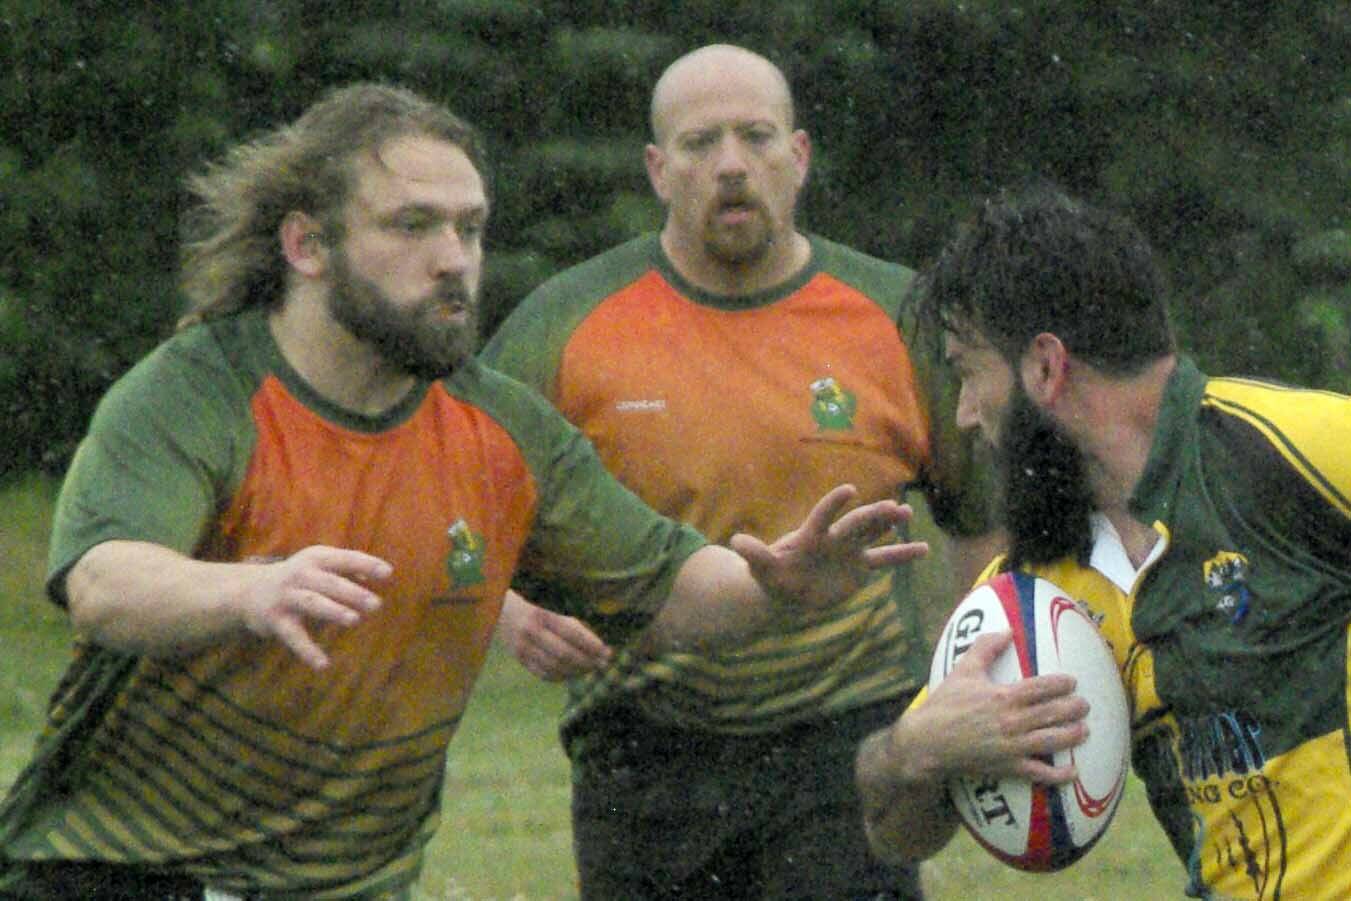 Ryan Childers of the Kenai River Wolfpack tries to evade Hermit CRABS players Sam "Sue" Warner (front) and Steven Ganley on Saturday, July 16, 2022, at the 2022 Kenai Dipnet Fest Rugby Tournament at Millennium Square in Kenai, Alaska. (Photo by Jeff Helminiak/Peninsula Clarion)